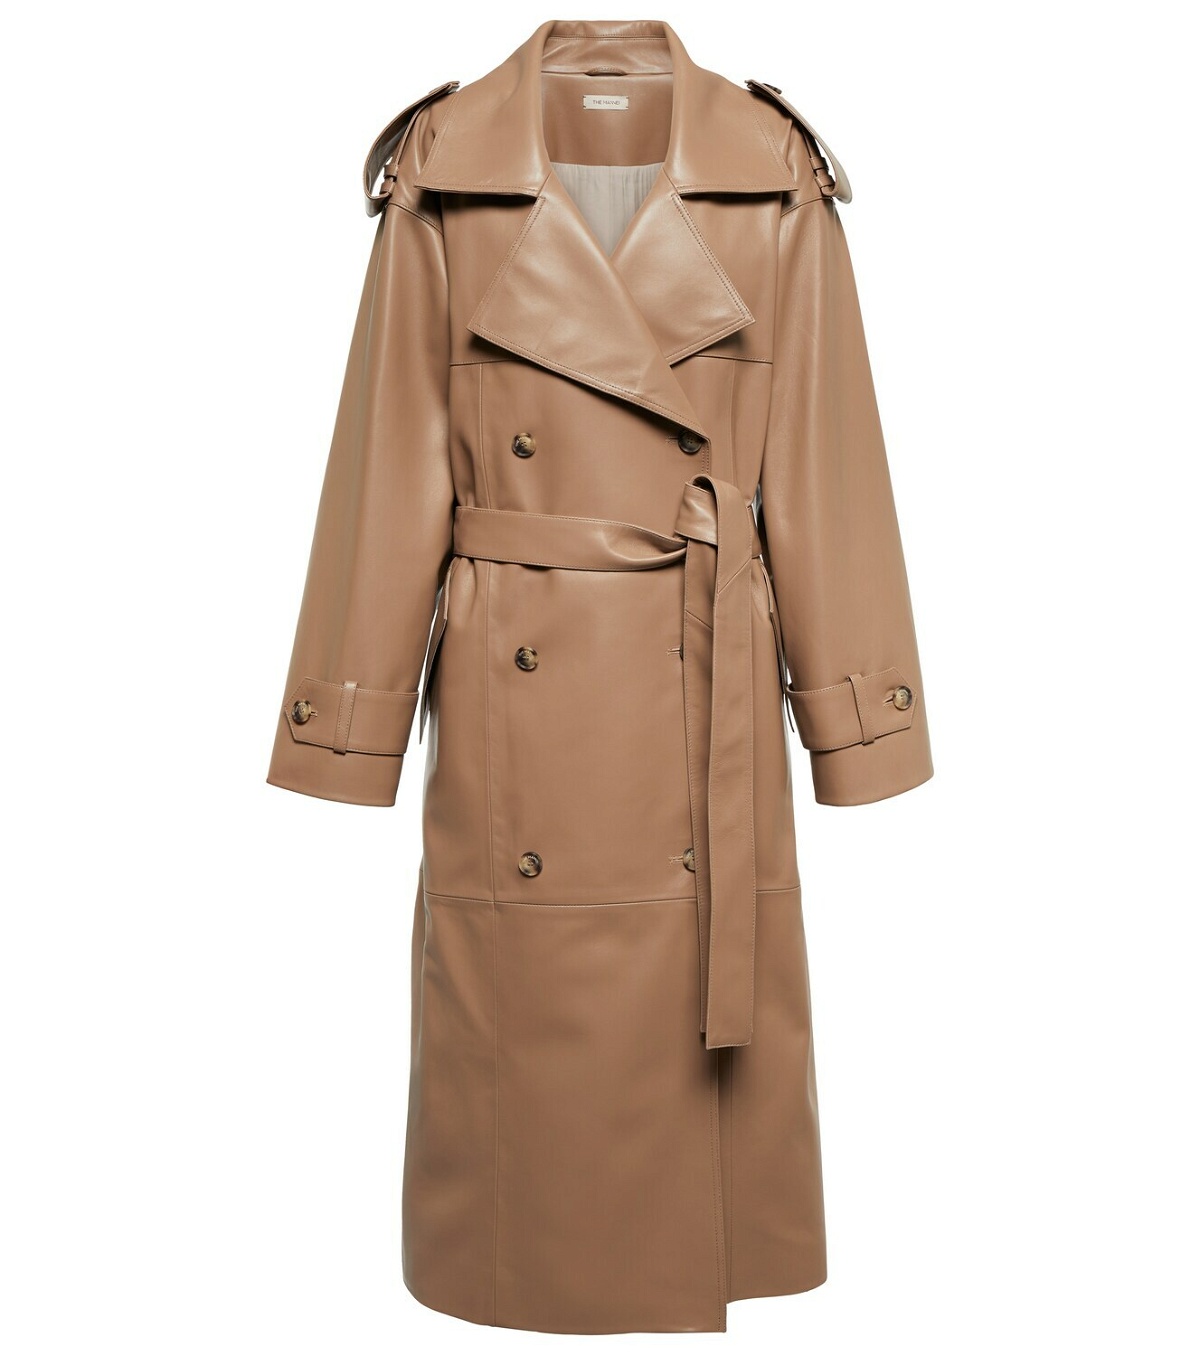 Photo: The Mannei Amman leather trench coat